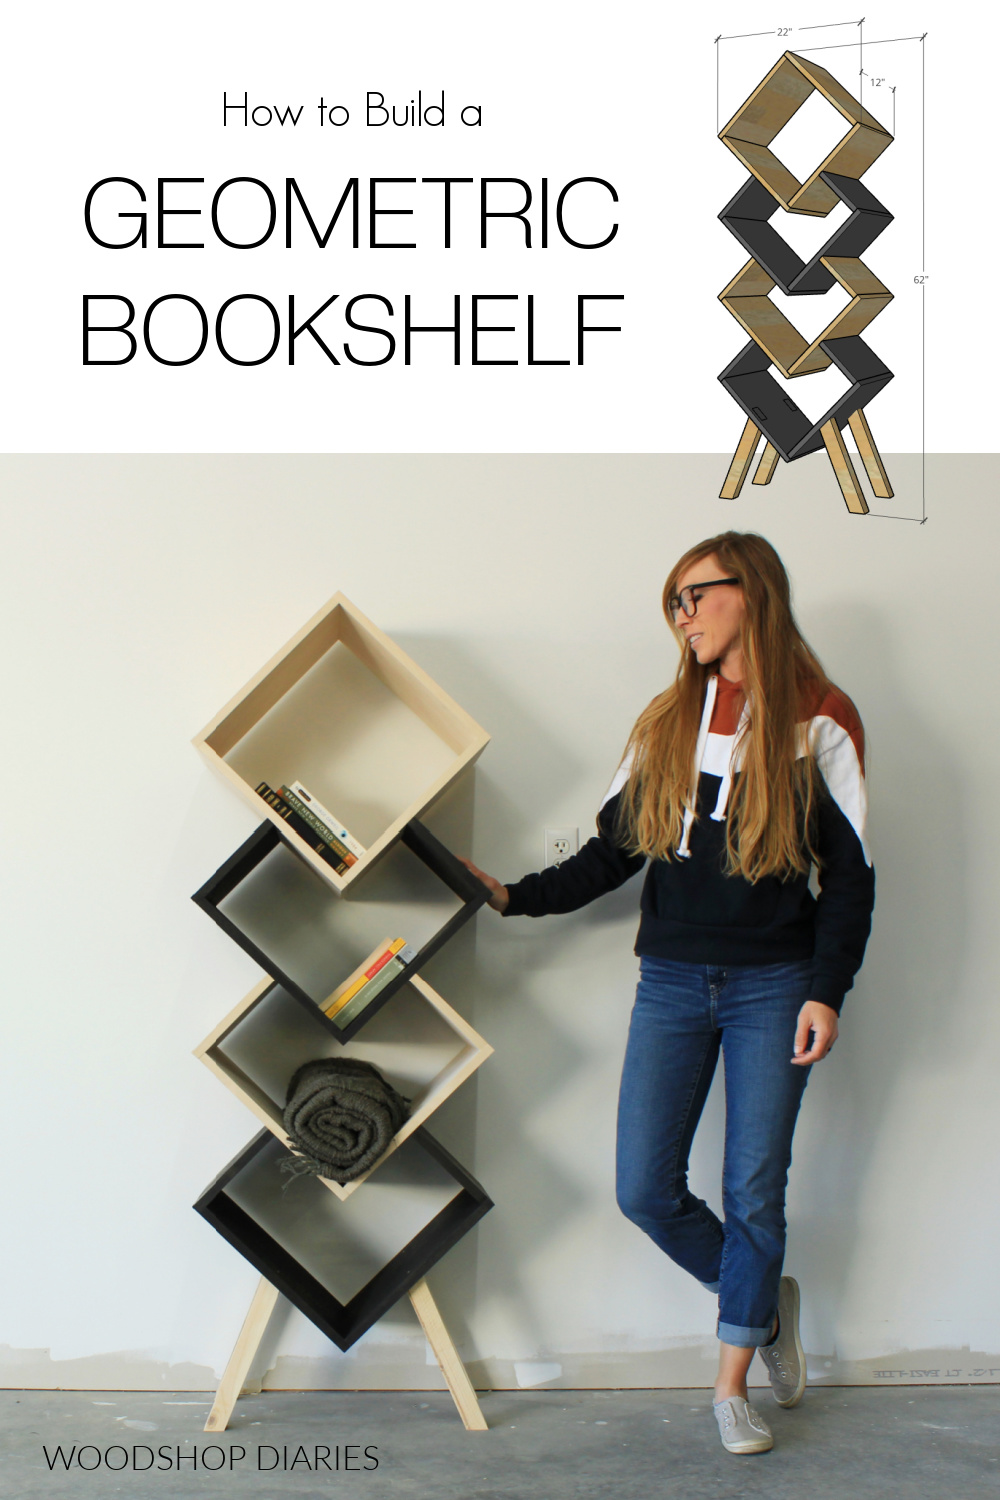 Pinterest image collage showing Shara Woodshop Diaries with bookshelf on bottom and overall sizing diagram at top with text "how to build a geometric bookshelf" 